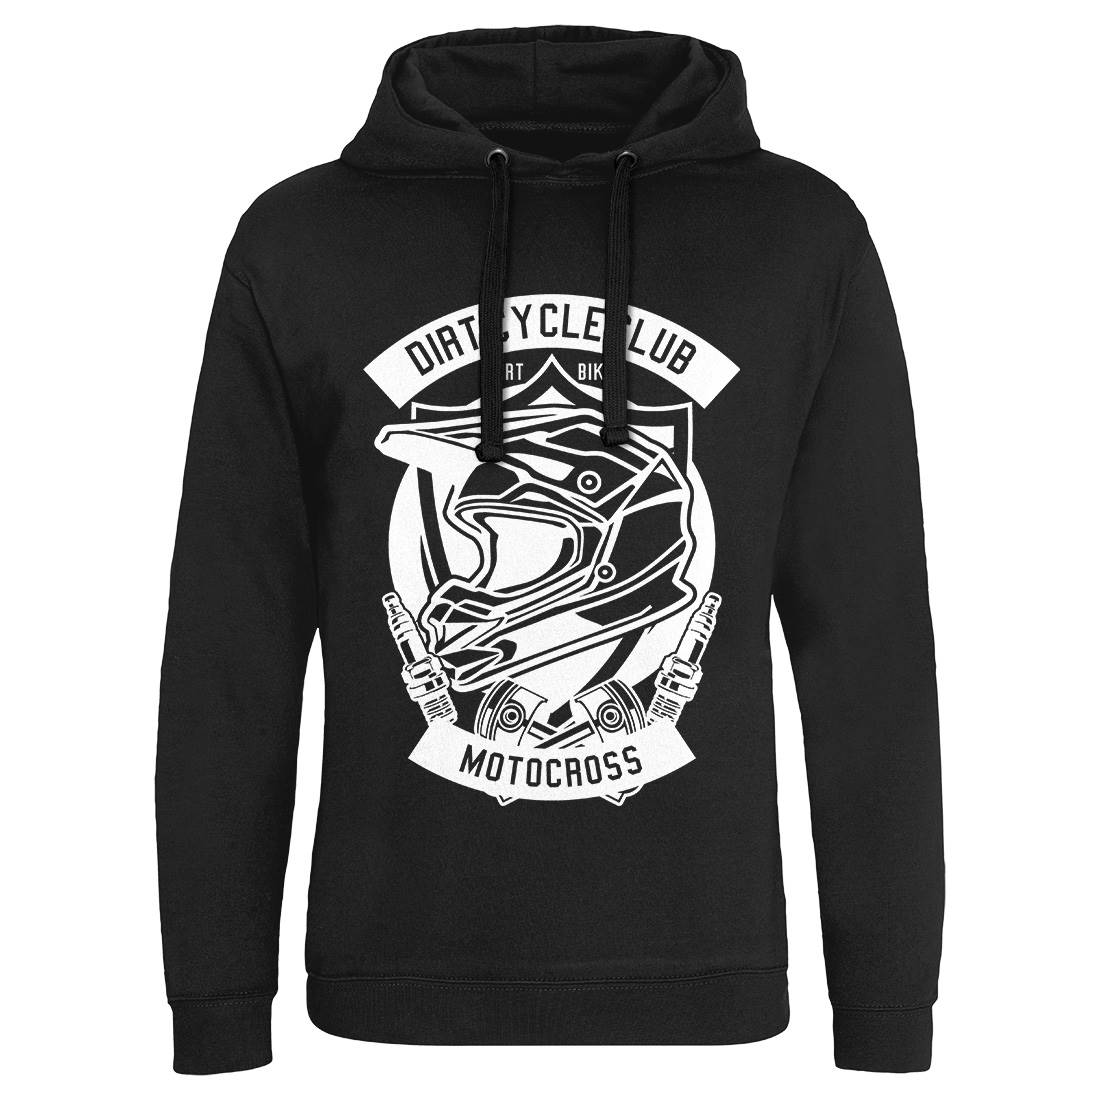 Dirty Cycle Club Mens Hoodie Without Pocket Motorcycles B532